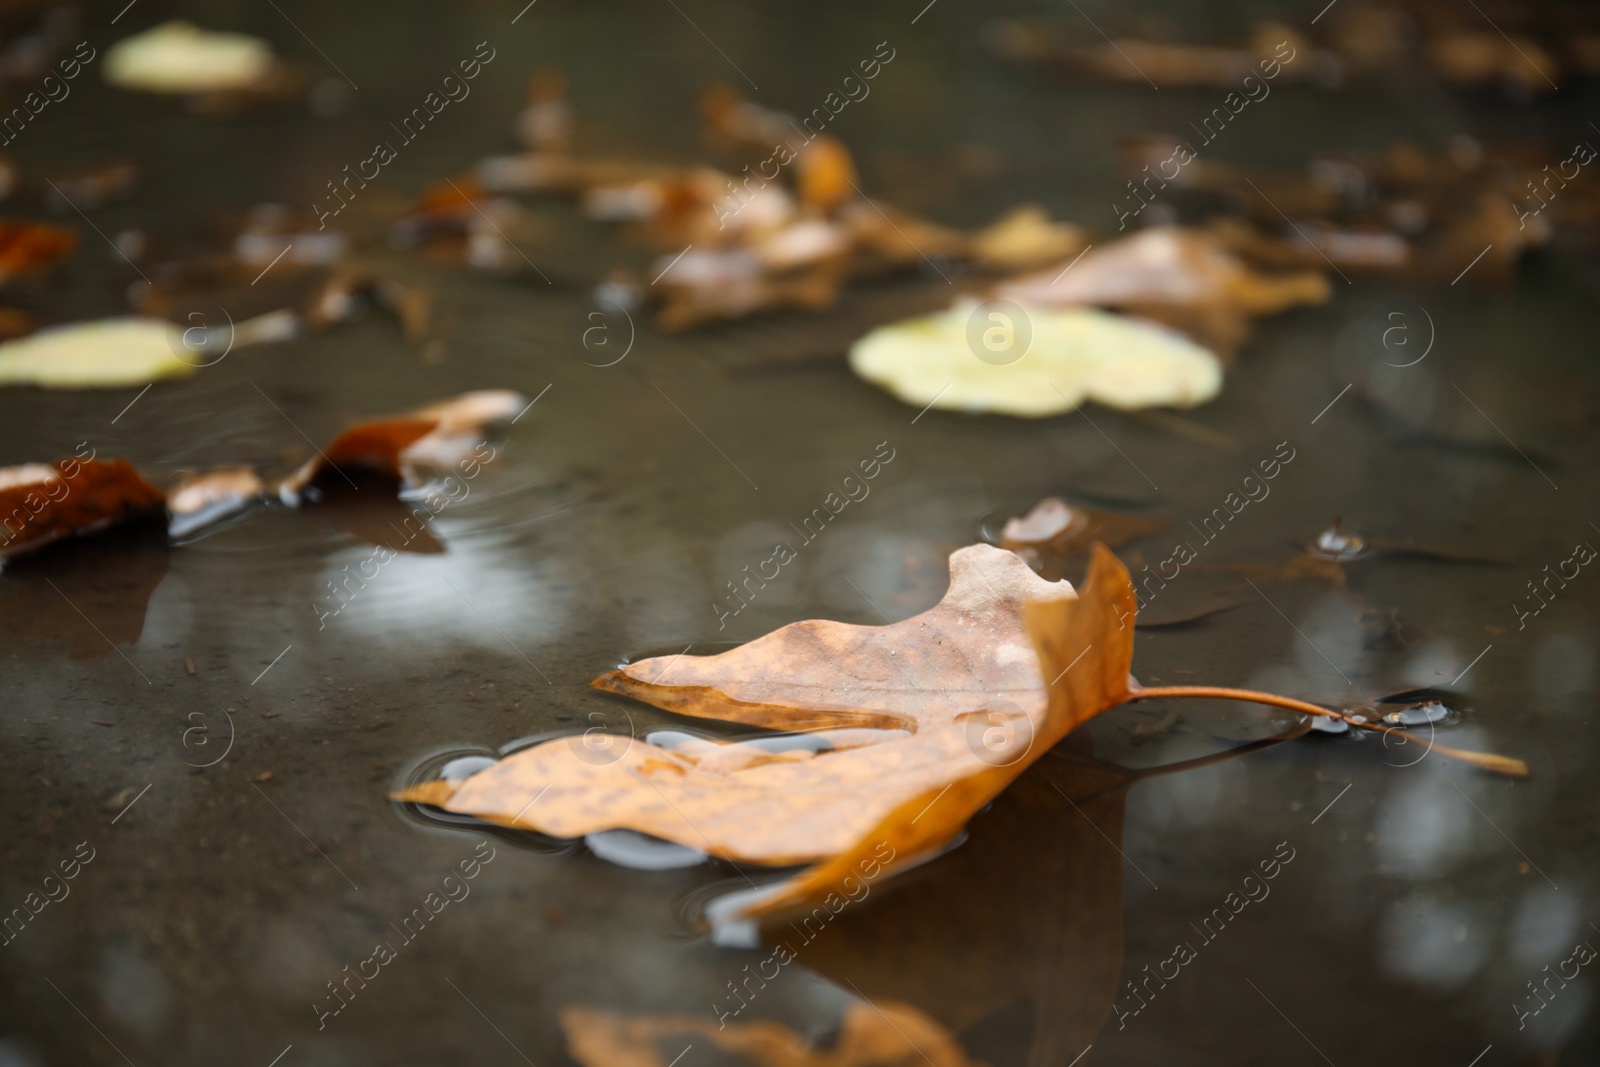 Photo of Autumn leaves in rain puddle on asphalt outdoors